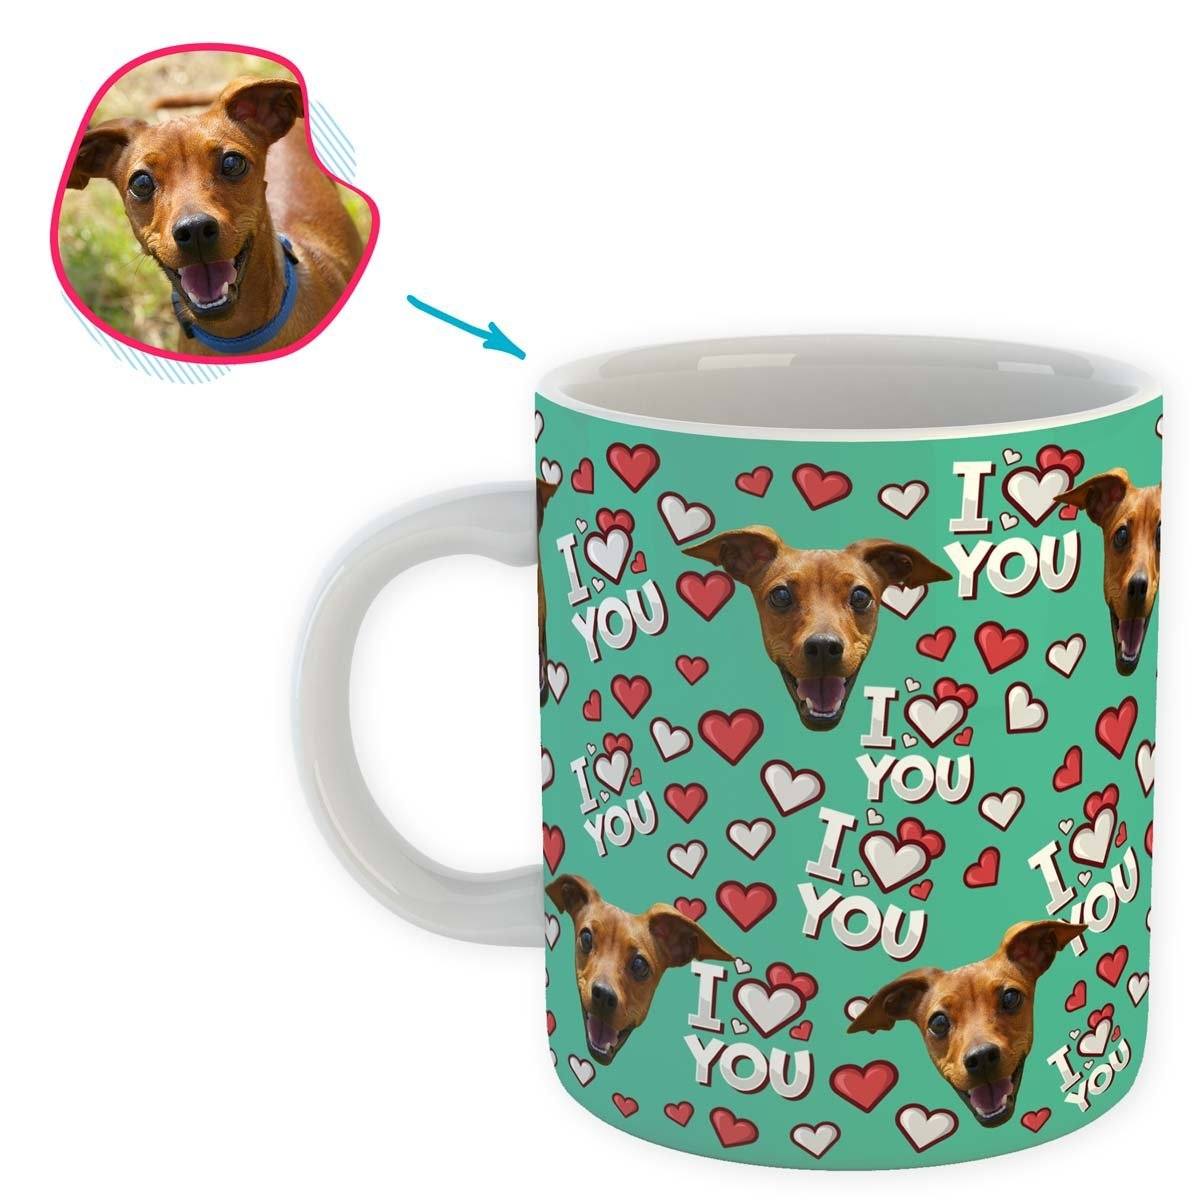 mint I Love You mug personalized with photo of face printed on it